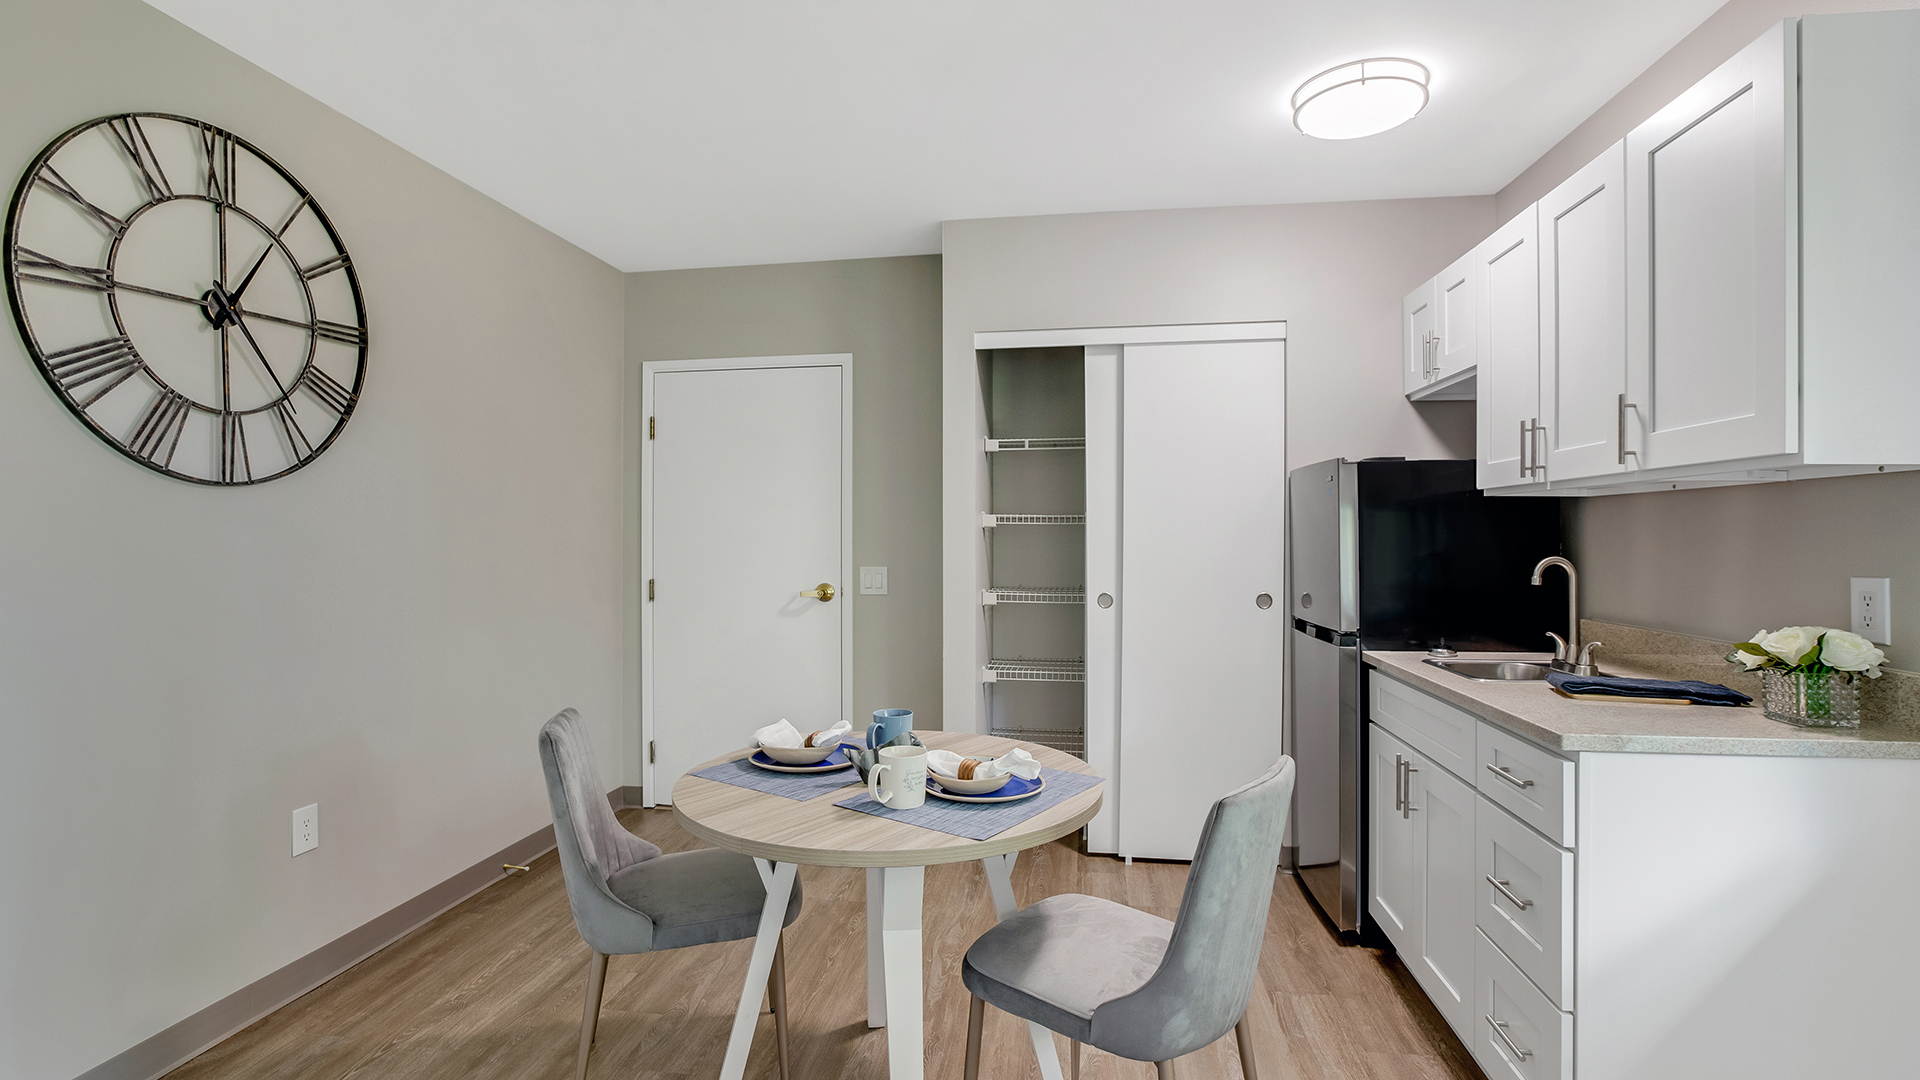 apartment kitchenette model at with small stainless steel refrigerator, counter top space, and two seated table